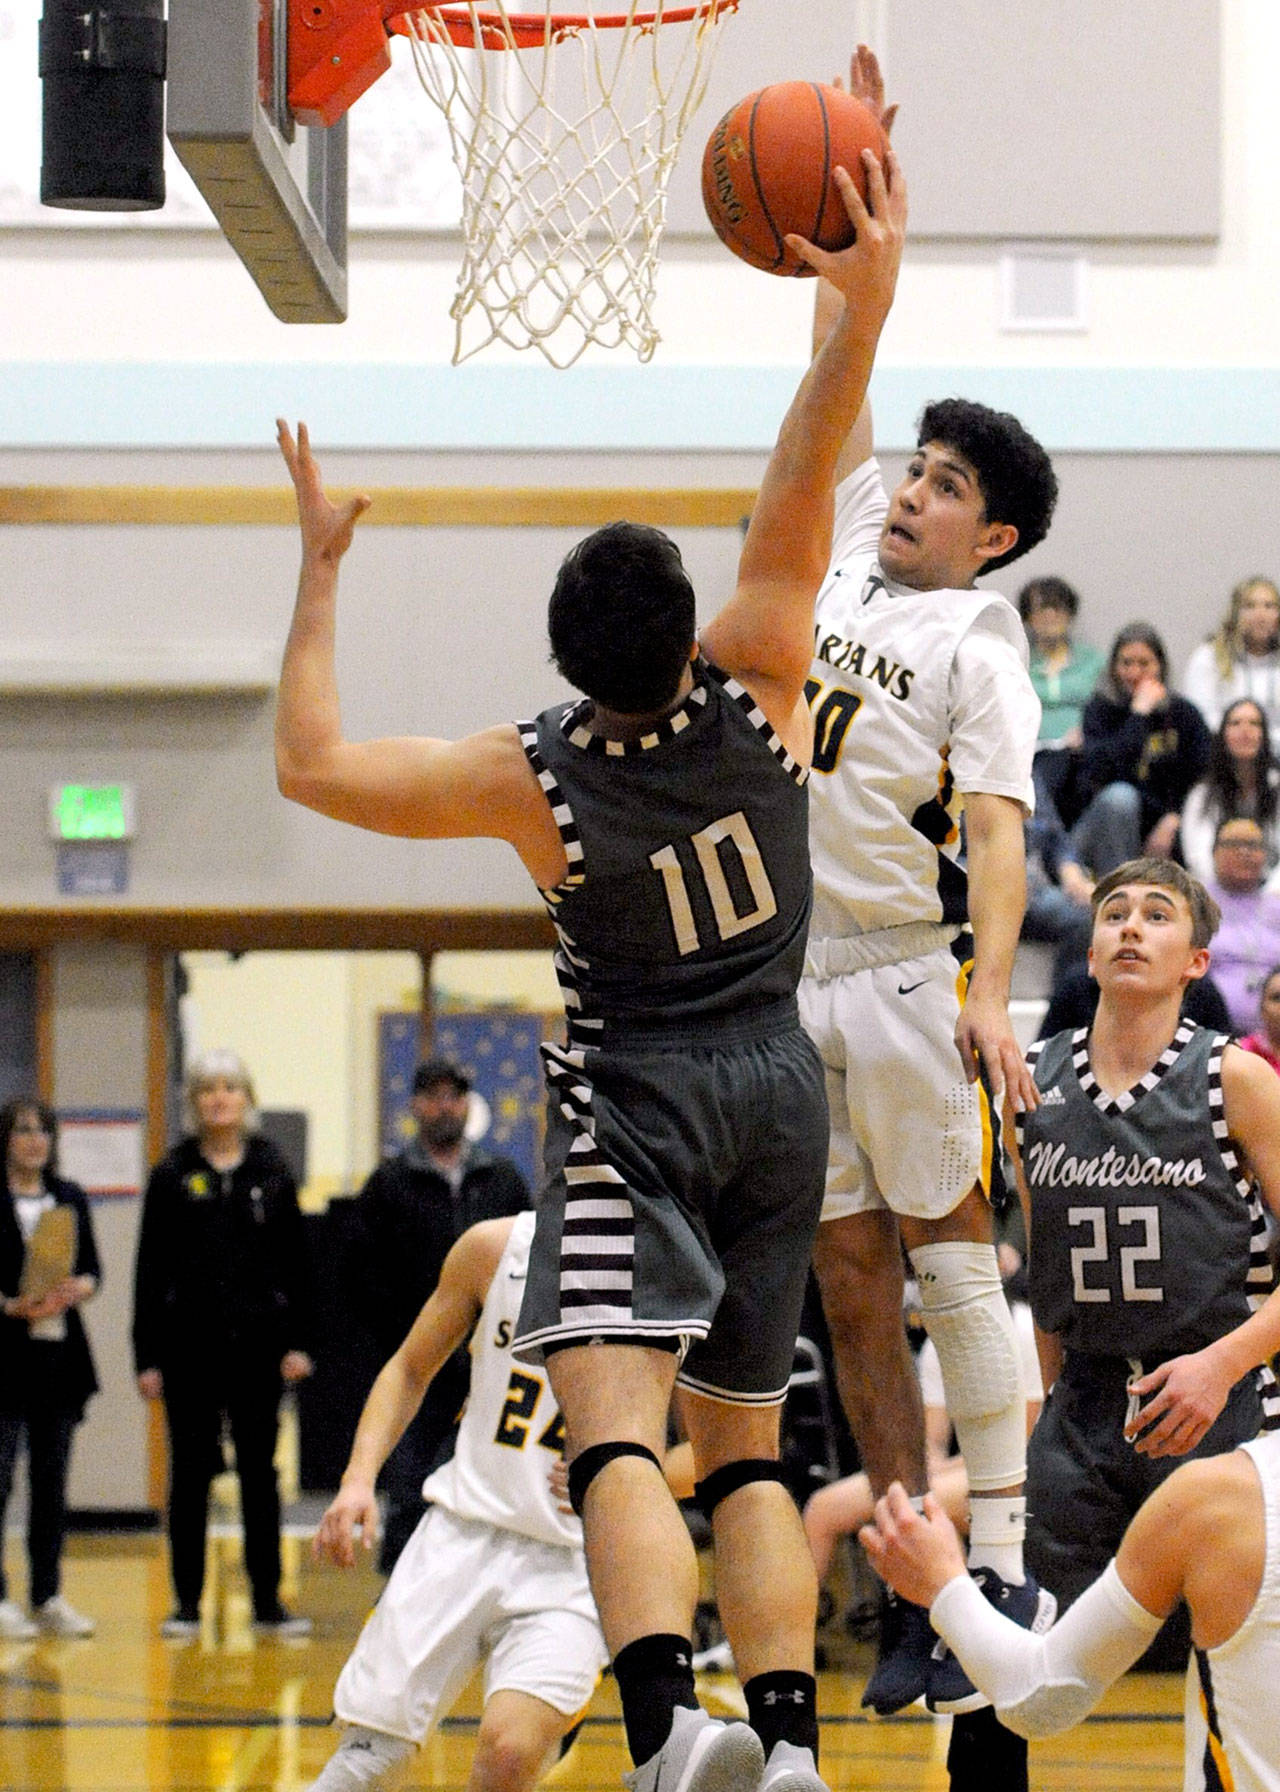 Spartan Tony Hernandez-Flores and Montesano’s Trace Ridgway go for the rebound Monday in Forks where the league leading Bulldogs came back from a 9-point deficit in the fourth quarter to defeat Forks 55-54. (Lonnie Archibald/for Peninsula Daily News)